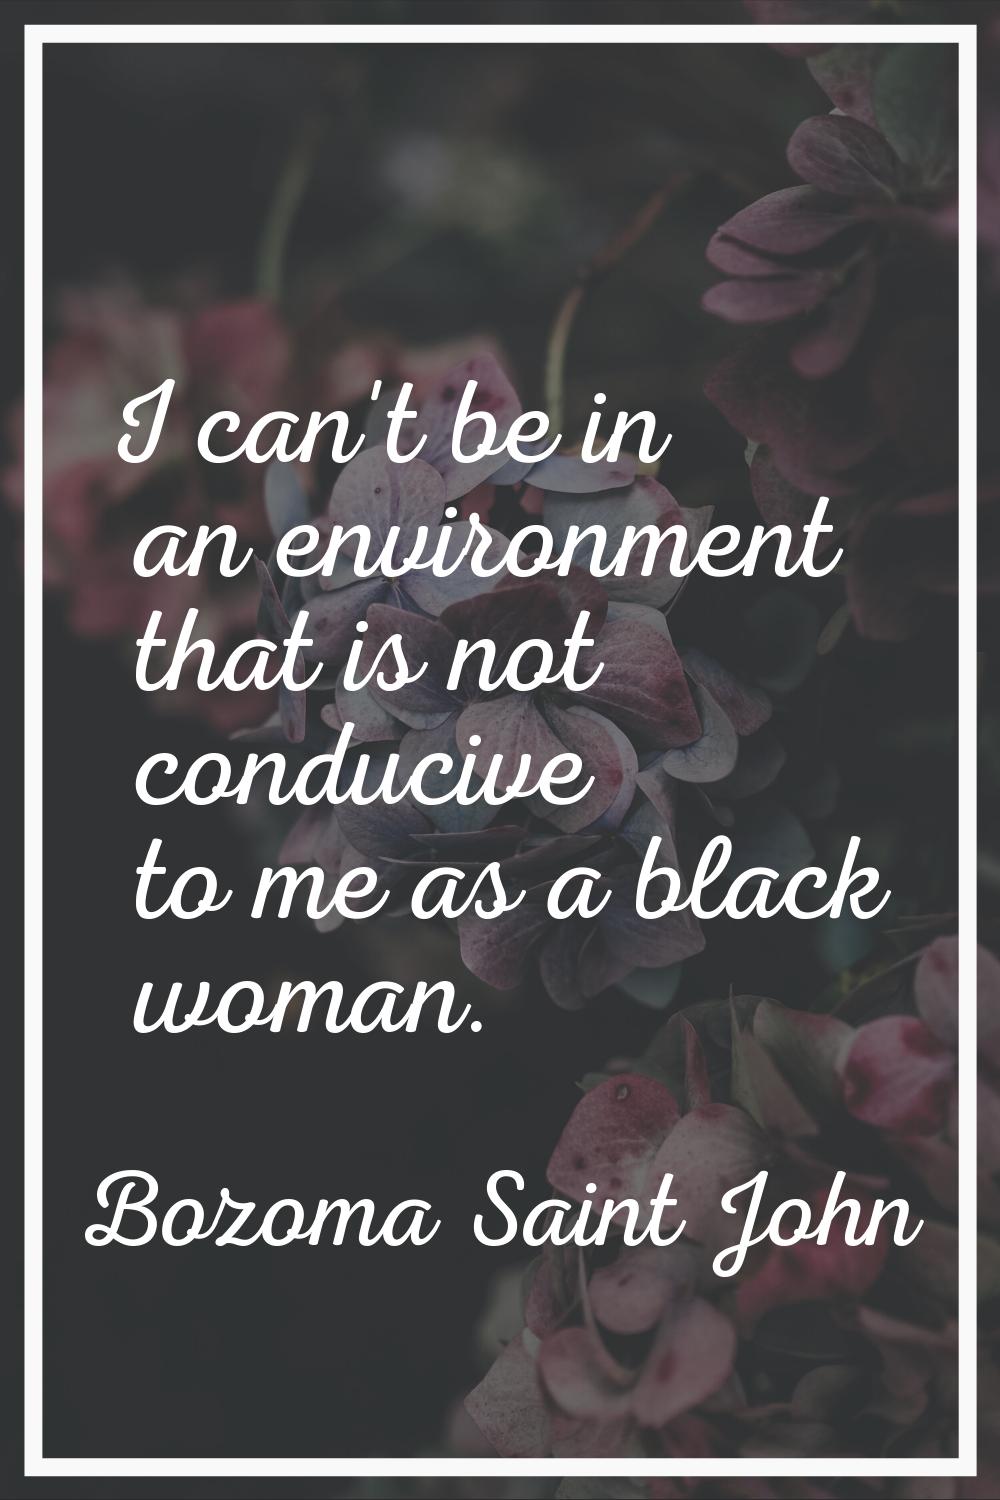 I can't be in an environment that is not conducive to me as a black woman.